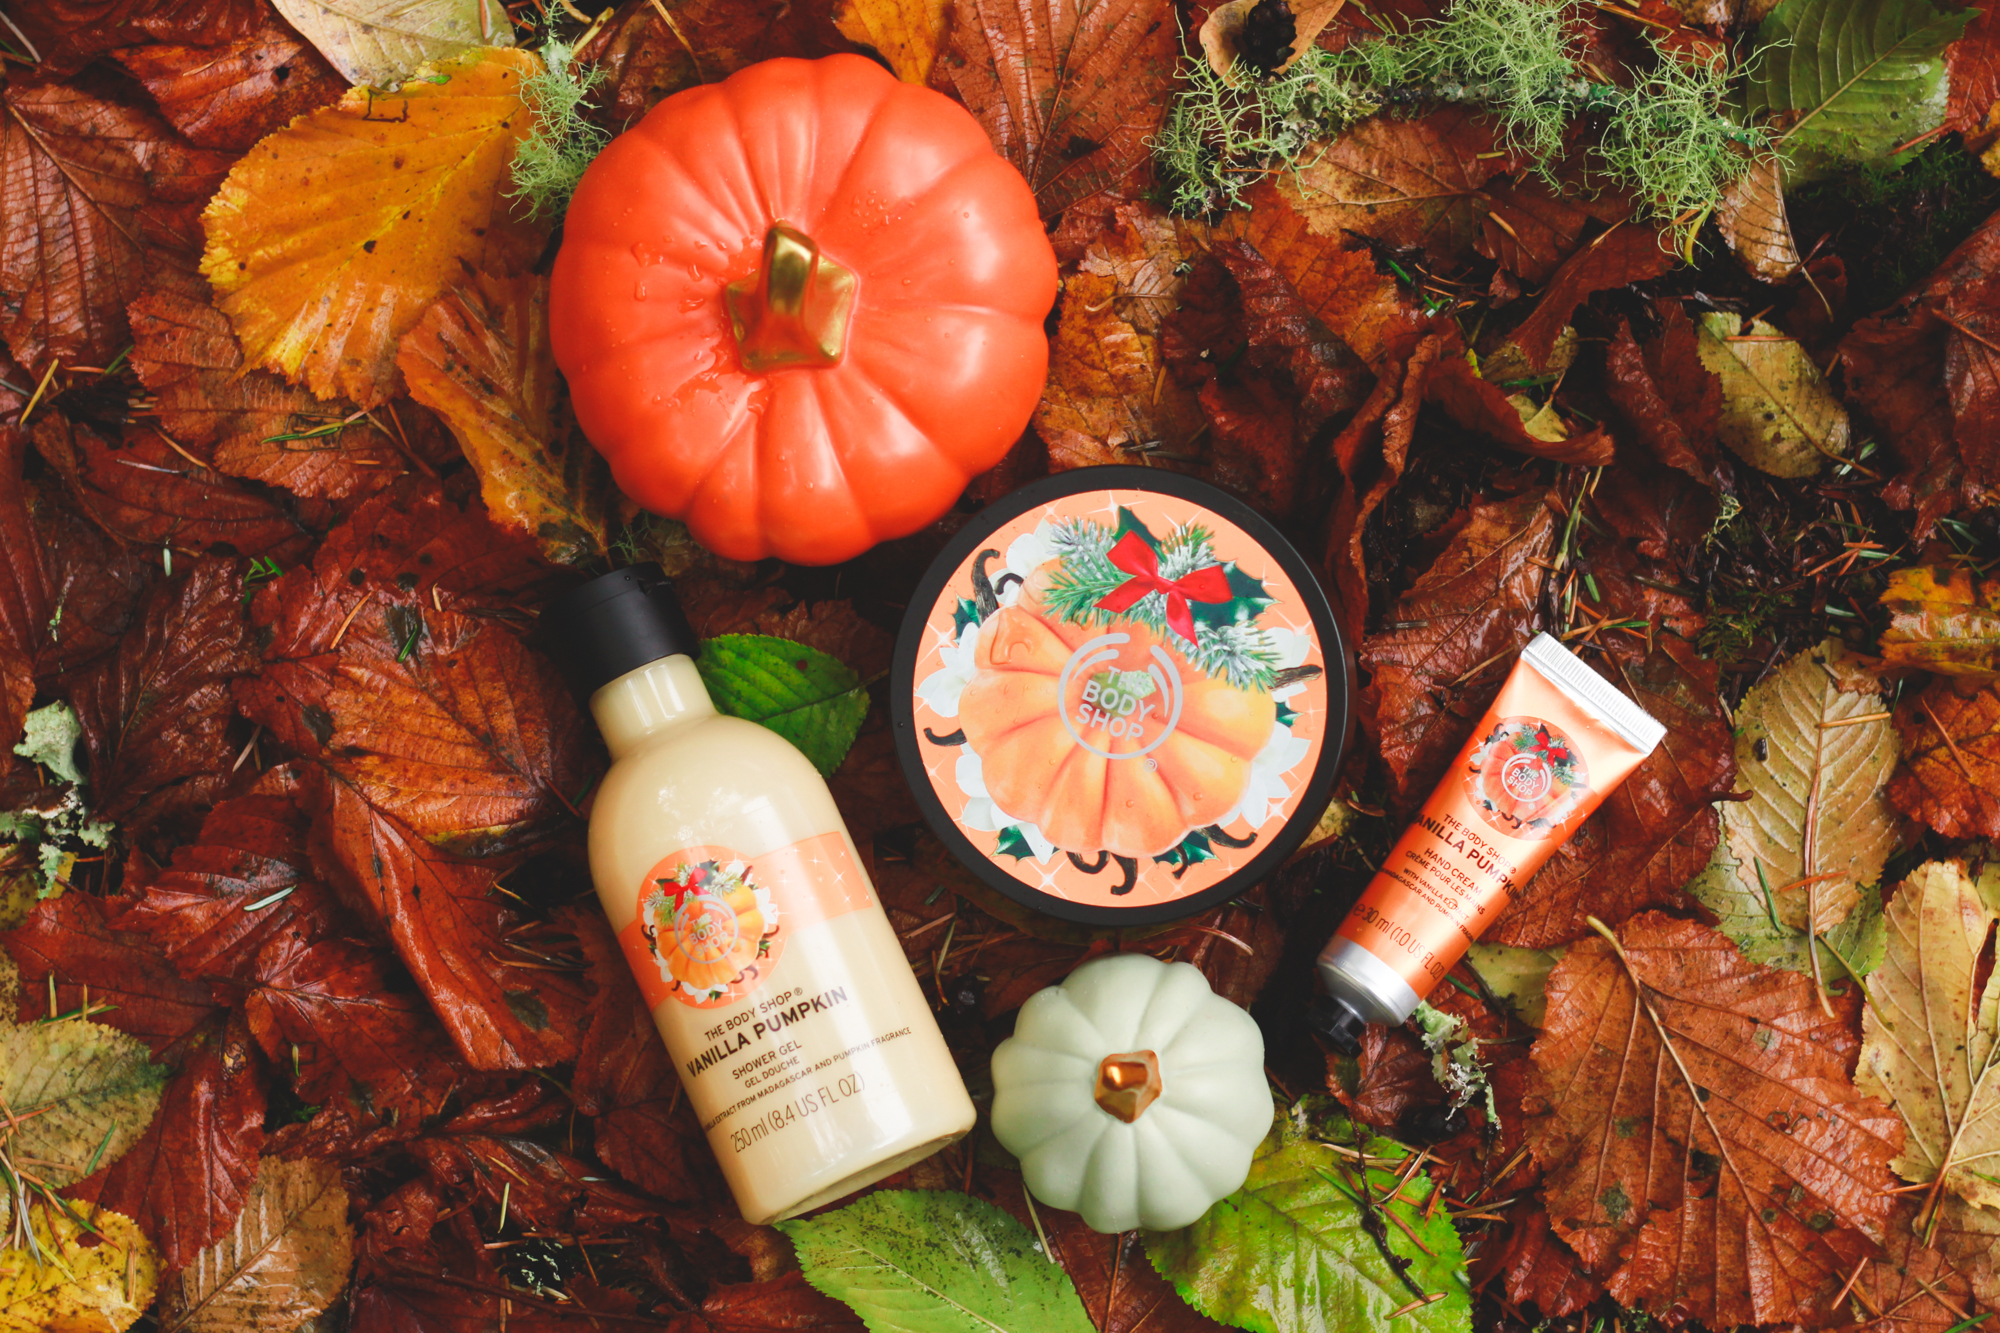 Reminiscing on Autumn | eyreeffect.com